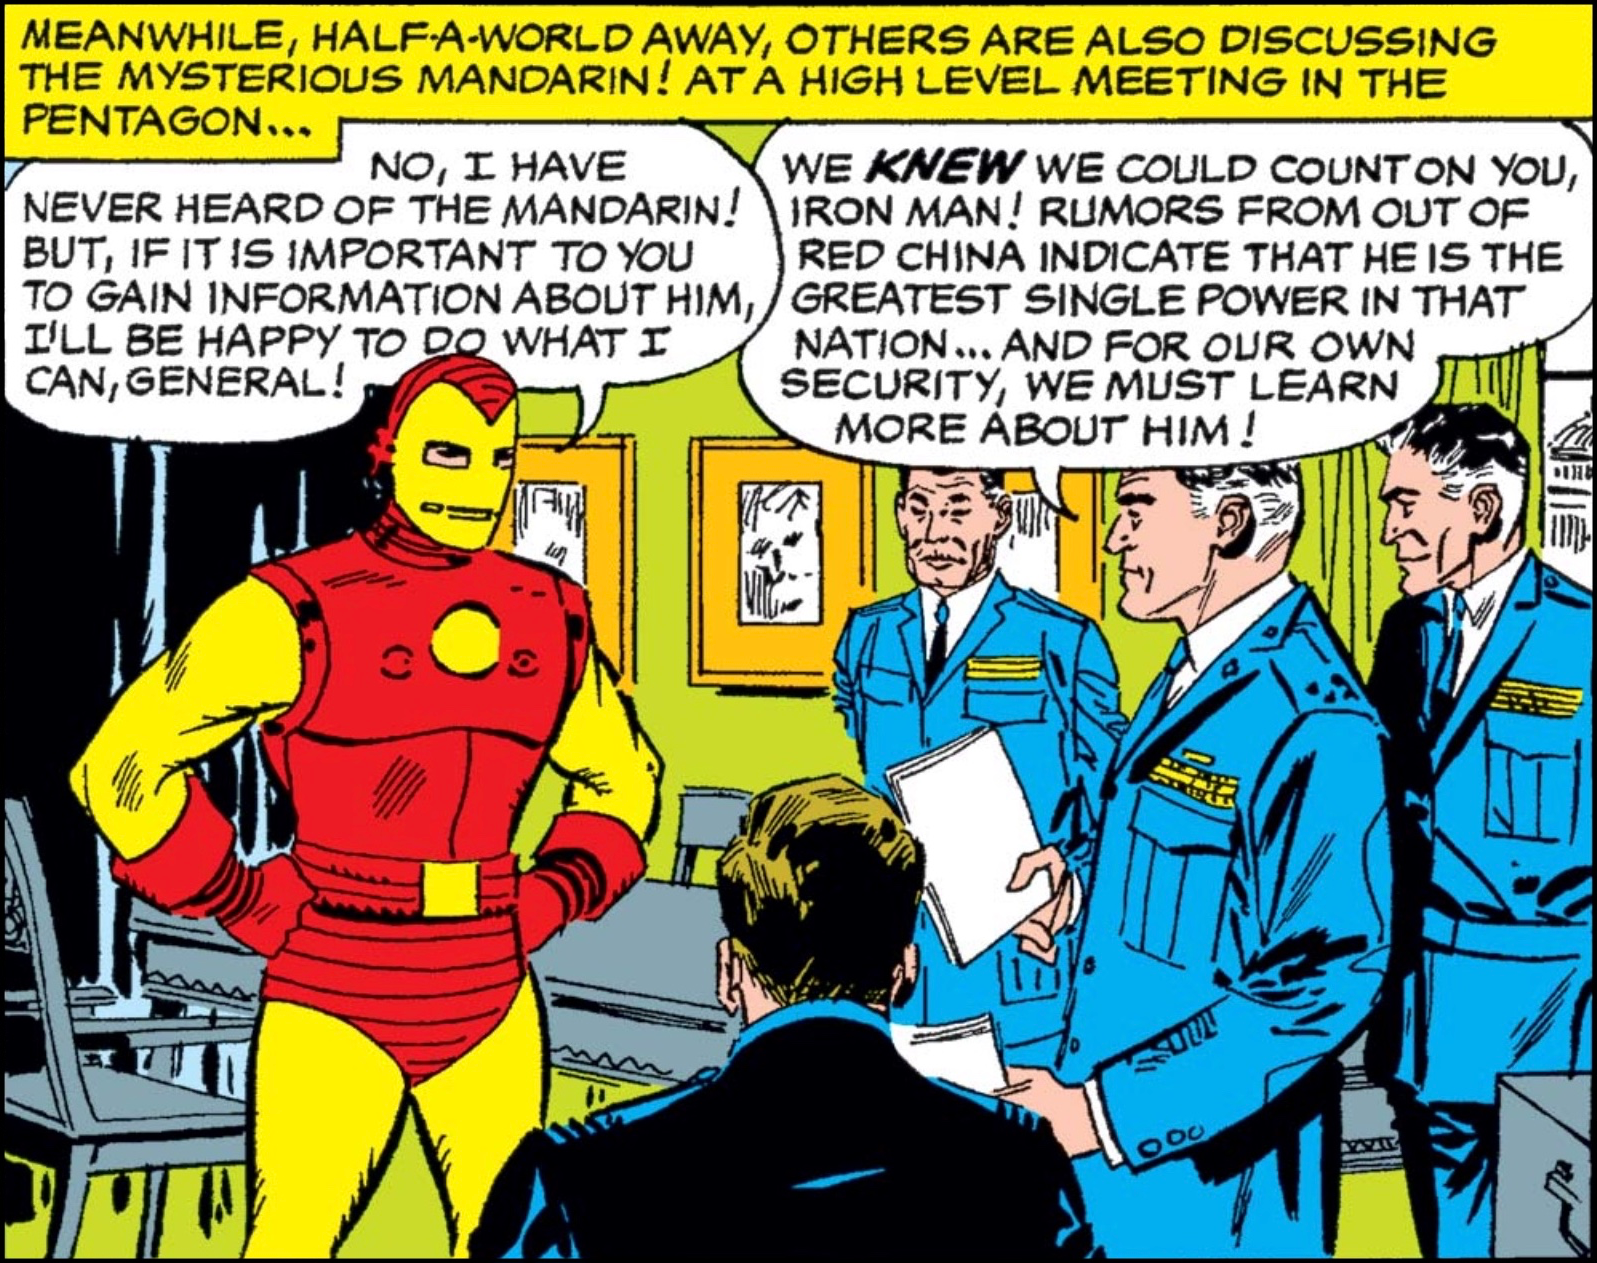 Iron Man and military officials discussing The Mandarin in a room sporting green walls and curtains